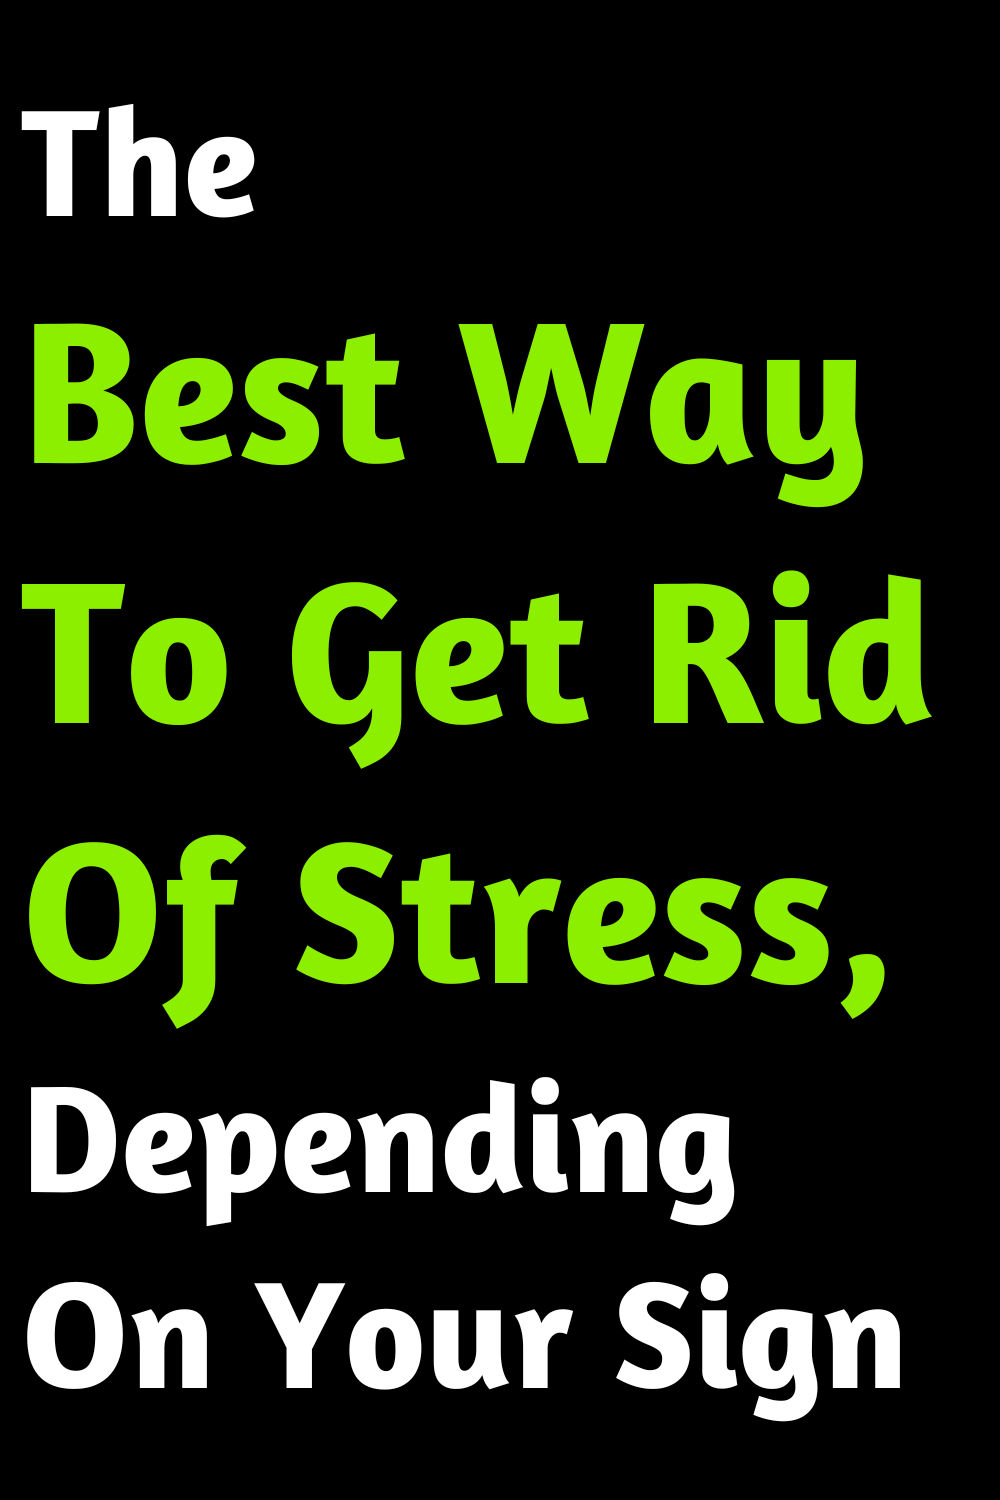 The Best Way To Get Rid Of Stress, Depending On Your Sign